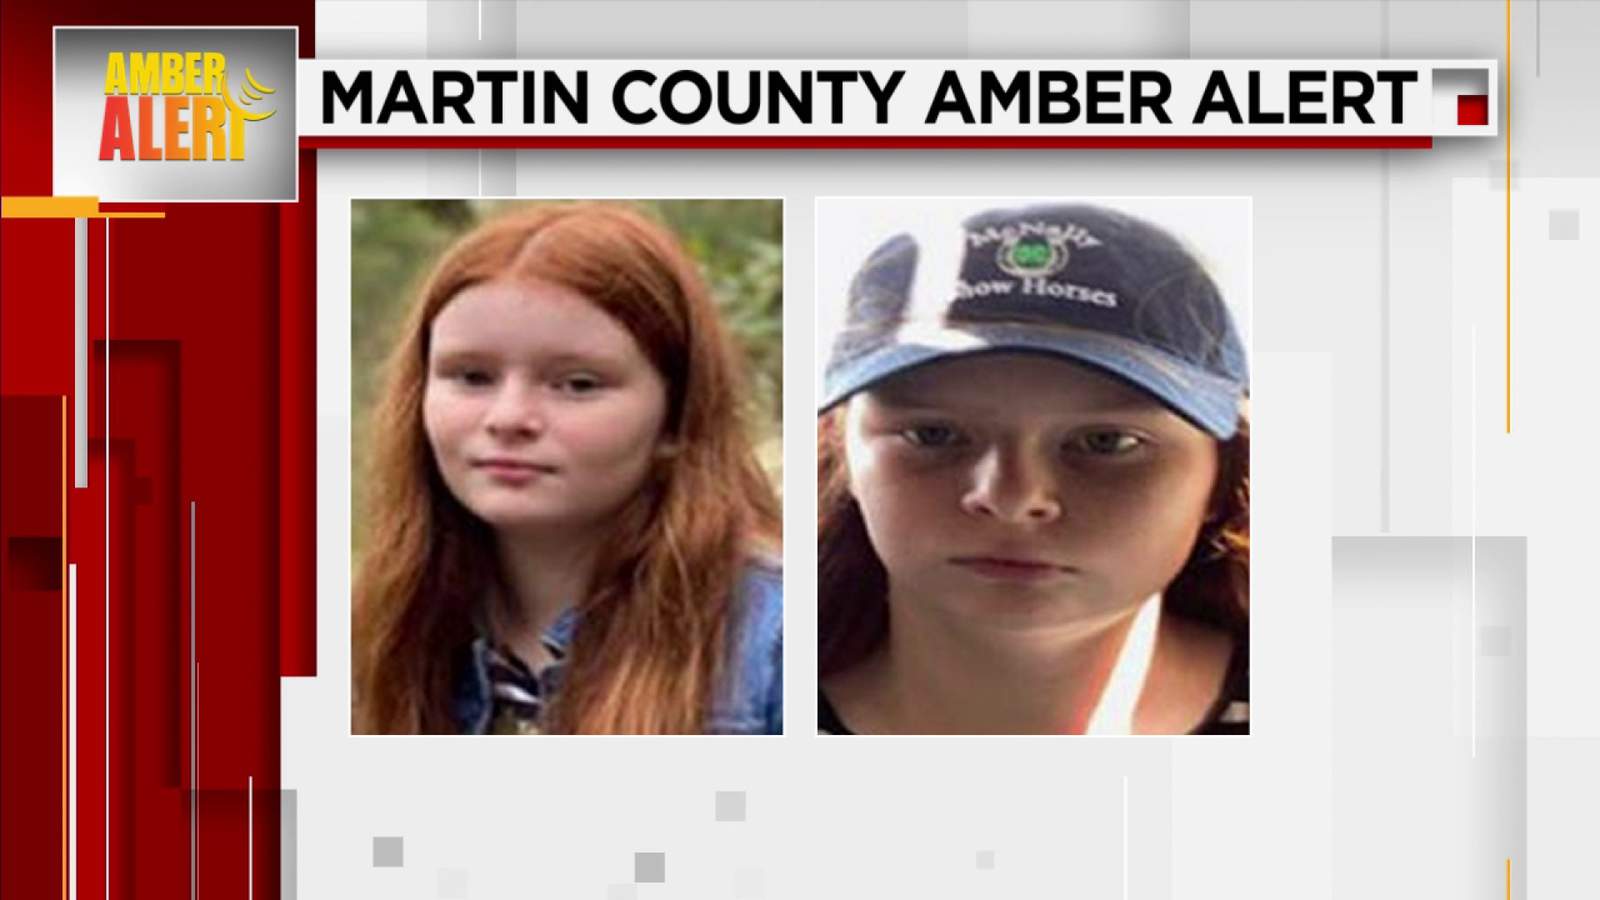 Amber Alert issued for 13-year-old Florida girl